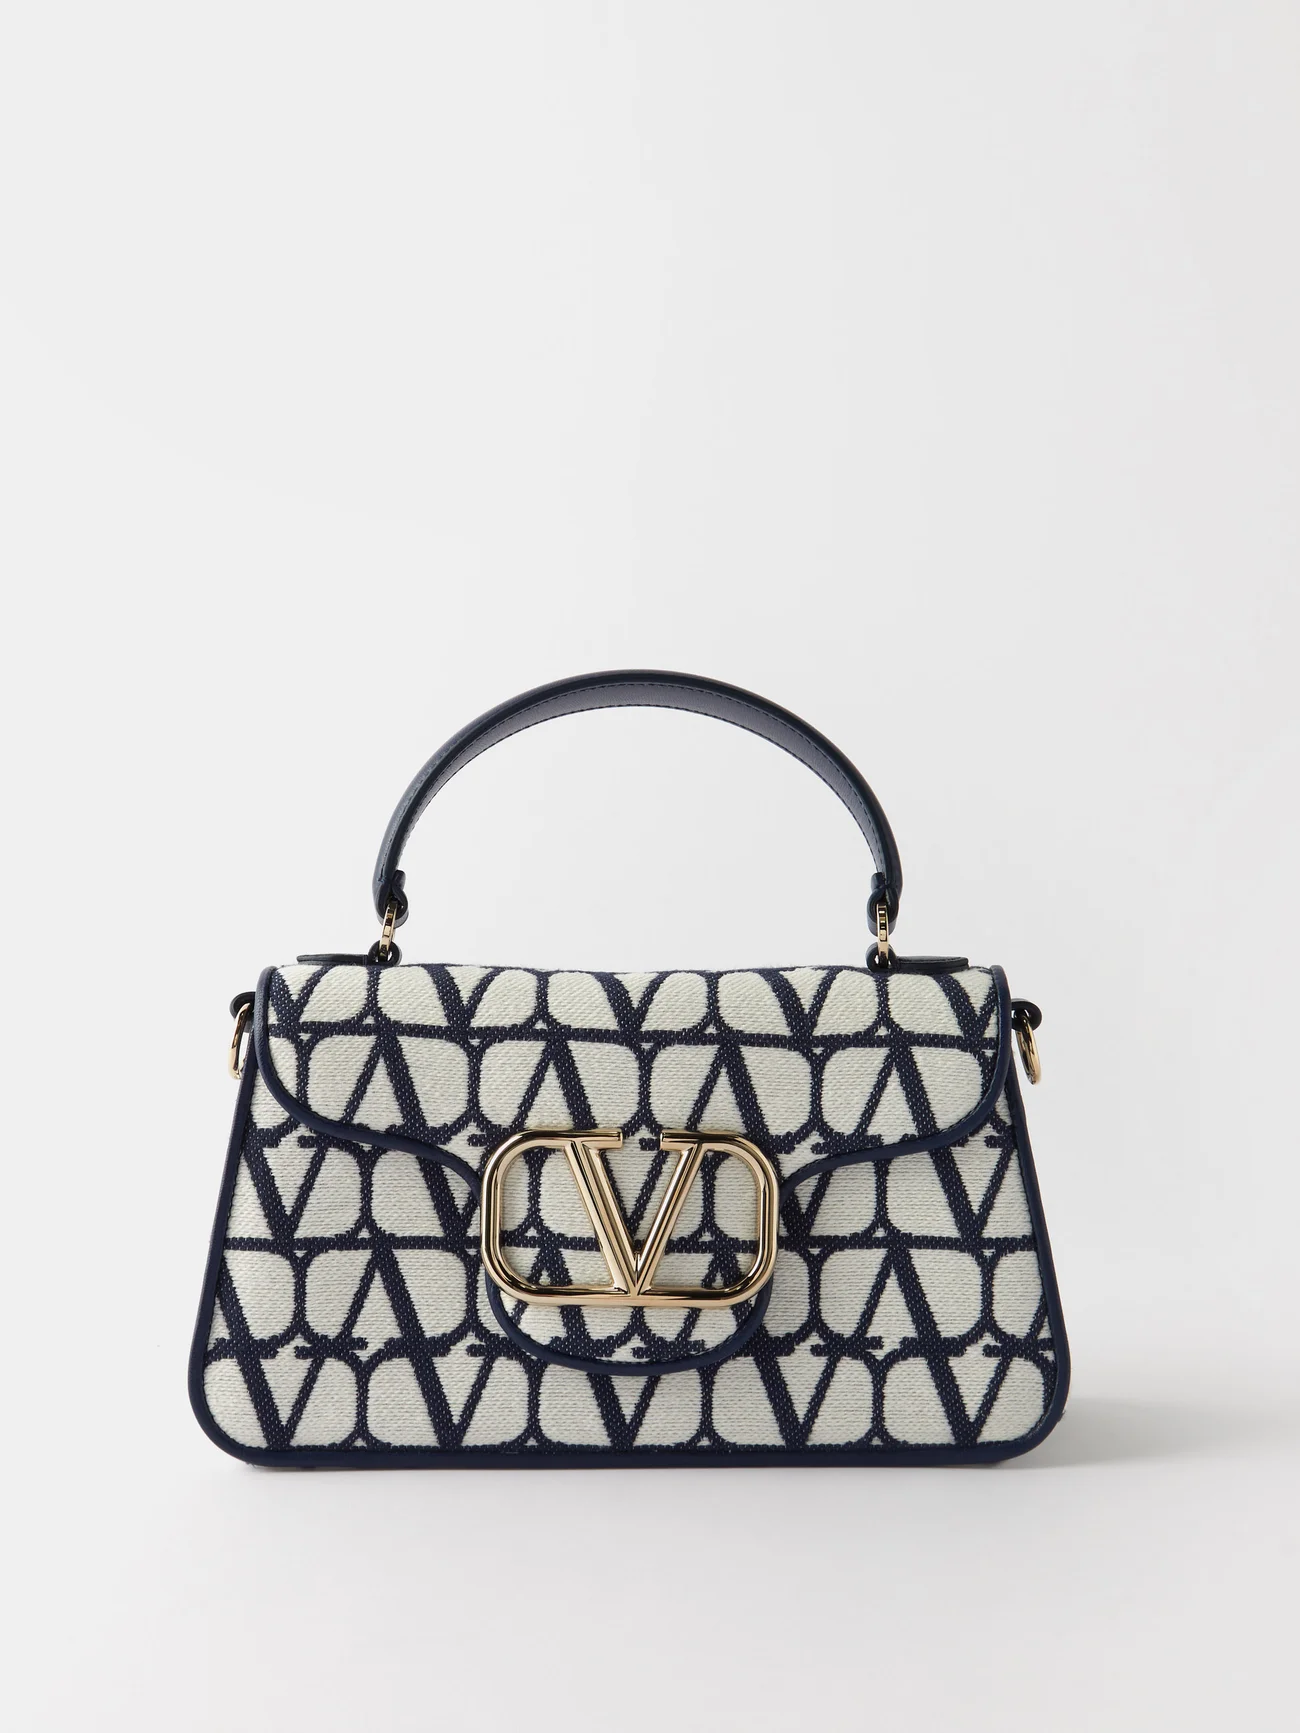 The New Iterations Of Valentino Loco Bag Are Season's Evening Favorites!